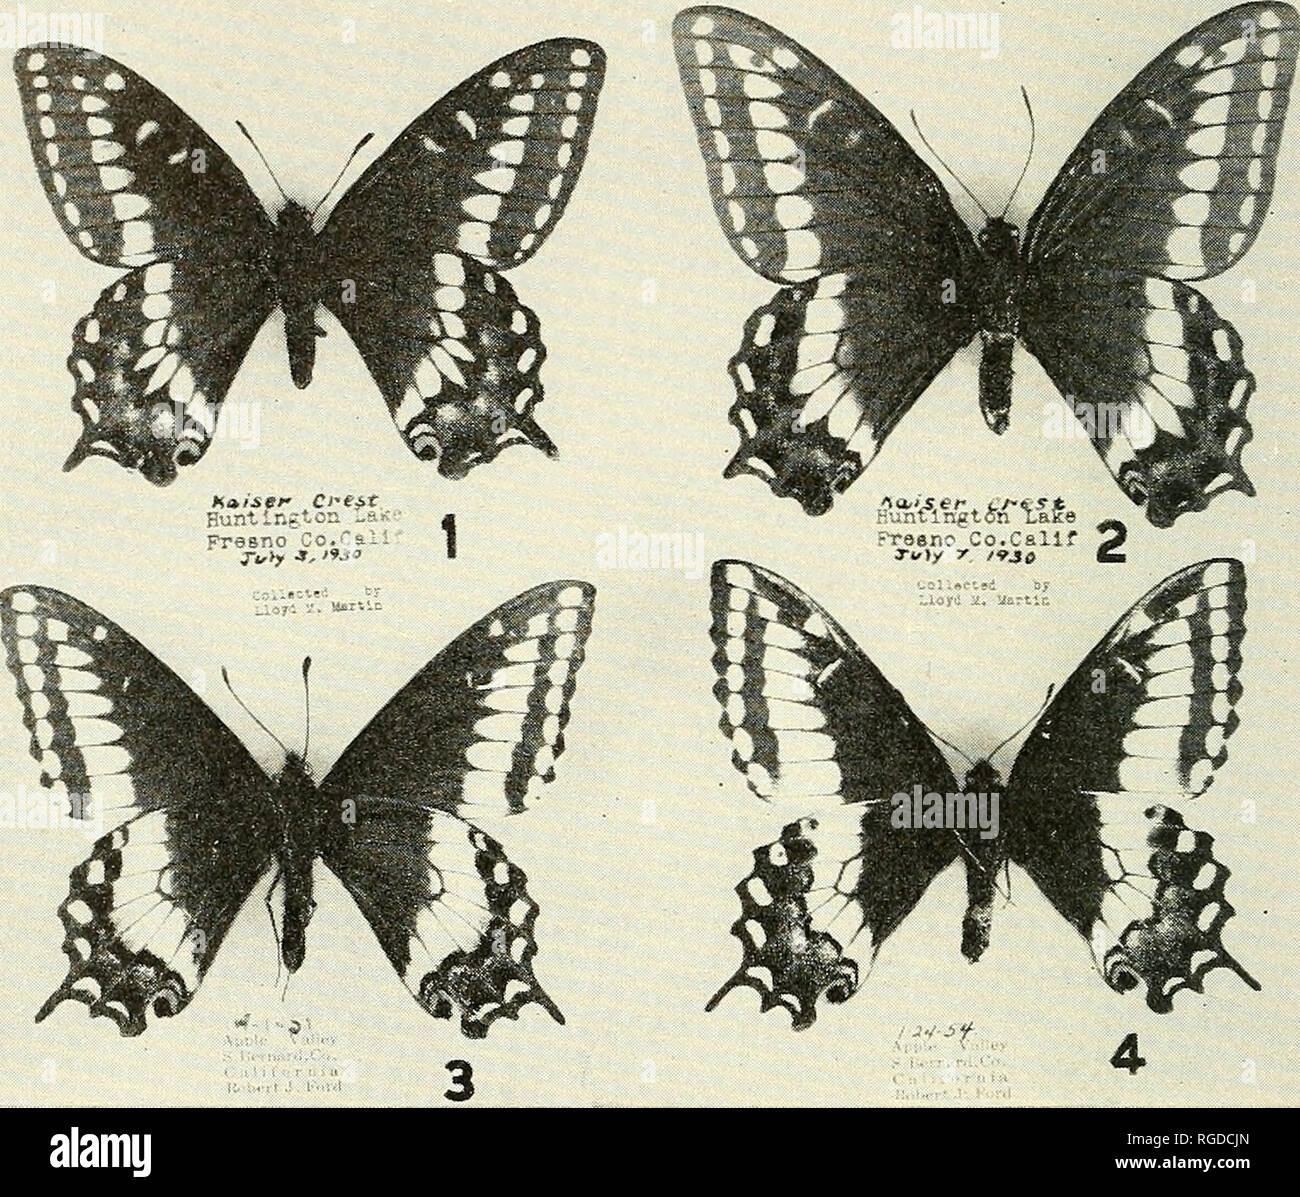 . Bulletin of the Southern California Academy of Sciences. Science; Natural history; Natural history. Bulletin, So. Calif. Academy of Sciences Vol. 54, Part 3, 1955. PLATE 41 Showing the under surfaces of Figure 1. Papilio indra $. Figure 2. Papilio indra 9. Figure 3. P. indra fordi $ . Figure 4. P. indra fordi 9 . All figures approximately % natural size. Photo courtesy Los Angeles County Museum. The type series includes, in addition, twelve paratypes, all but No. 12 having been taken by Robert J. Ford in the field, or reared by him from larvae. No. 12 was taken by Mr. Fred Thorne. Paratype N Stock Photo